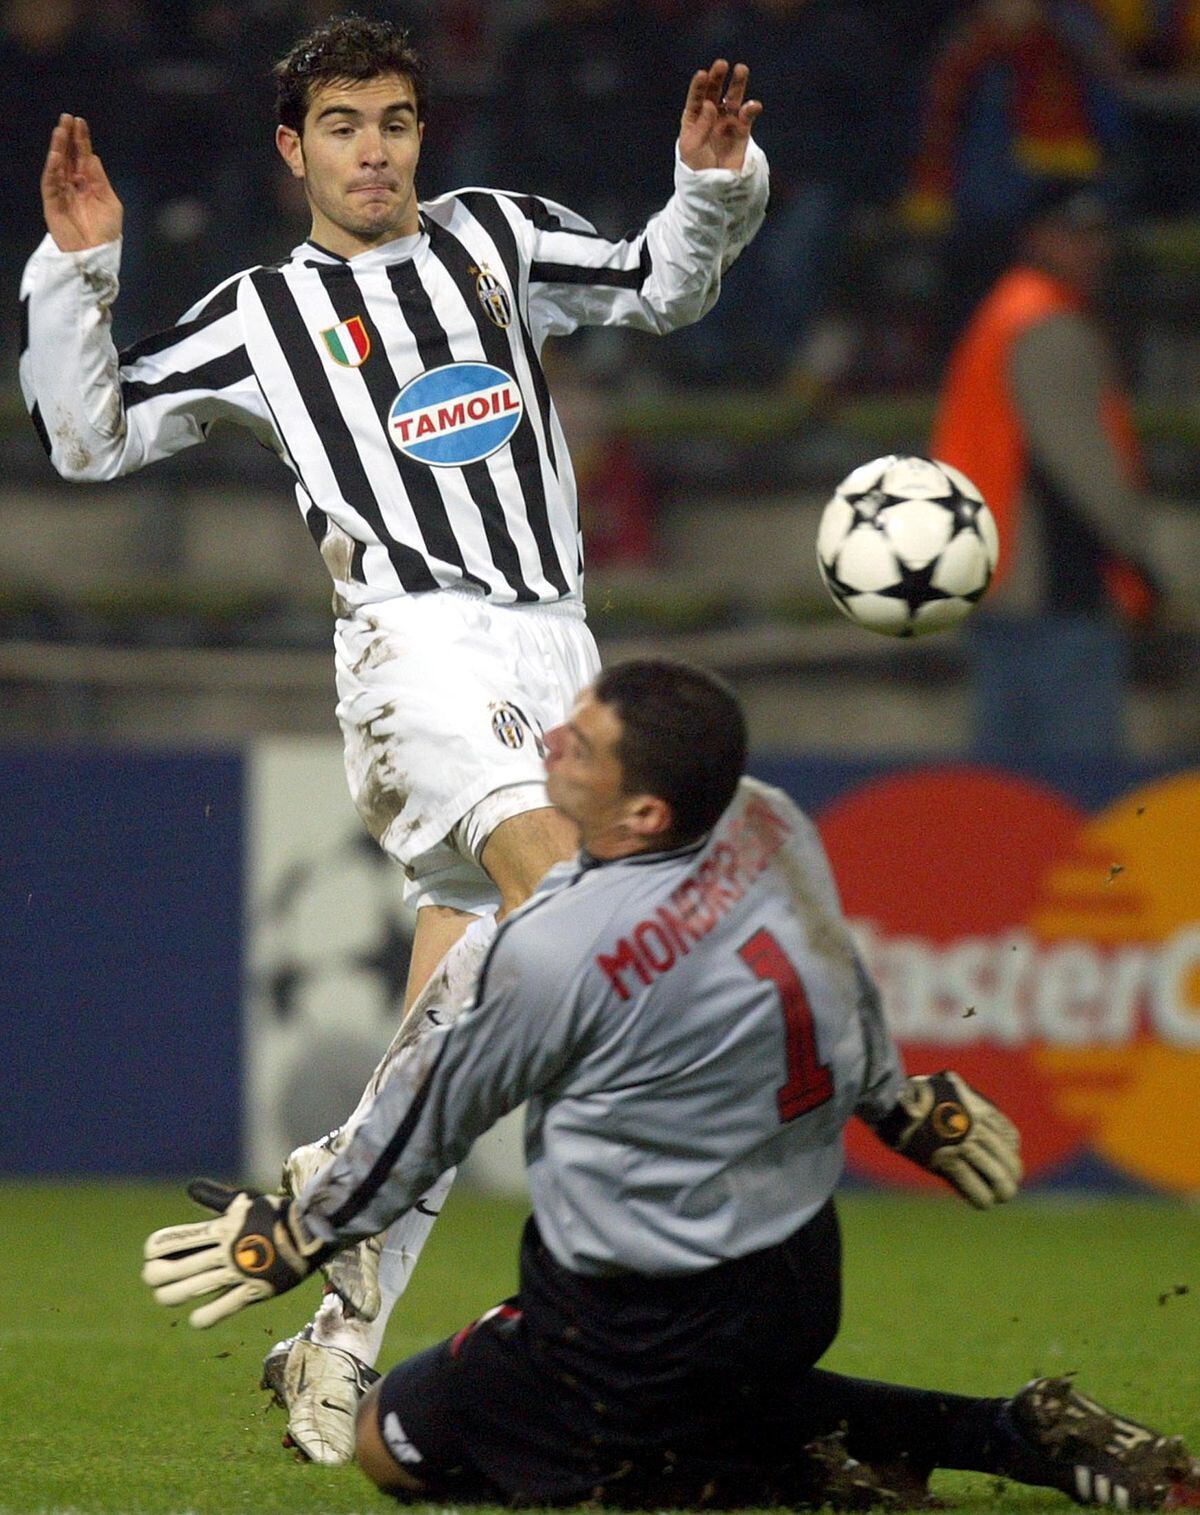 Aly Mondragon (R), goalkeeper of Galatasaray Istanbul saves a shot from Enzo Maresca of Juventus Turin during their Champions League Group D first phase match at the Westfalen stadium in Dortmund, Germany, December 2, 2003.     REUTERS/Kai Pfaffenbach